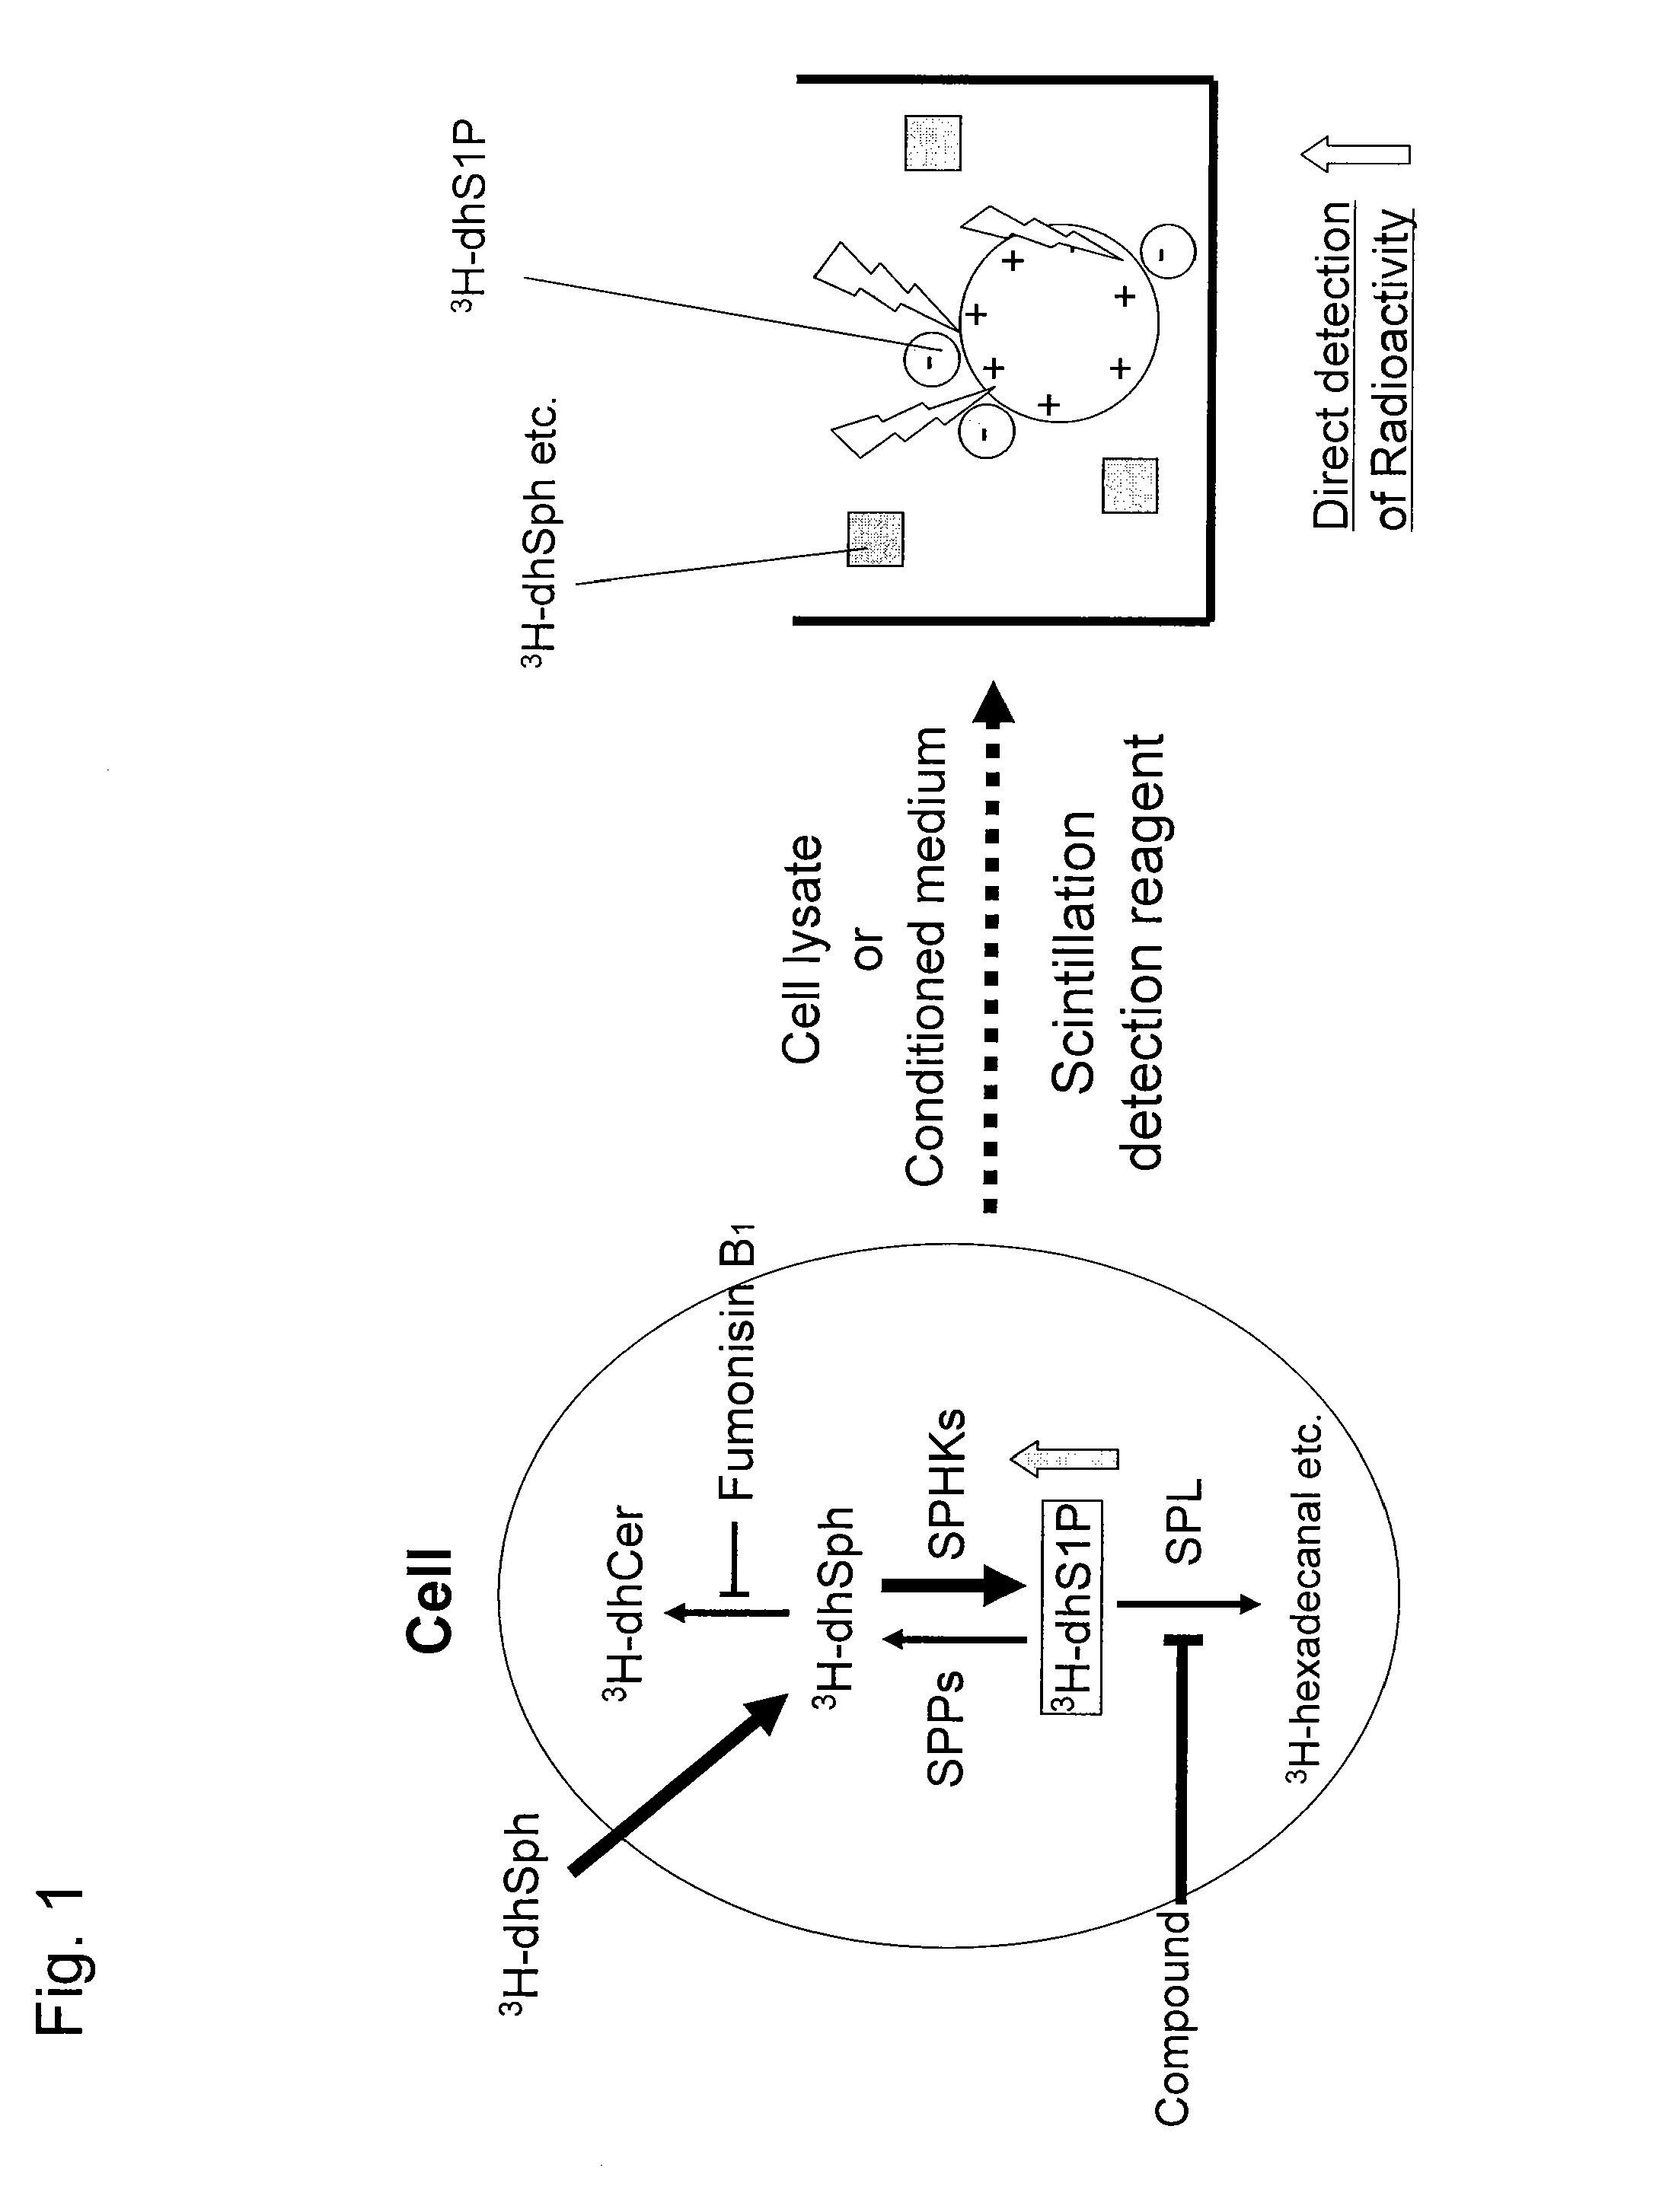 Method for screening for S1P lyase inhibitors using cultured cells